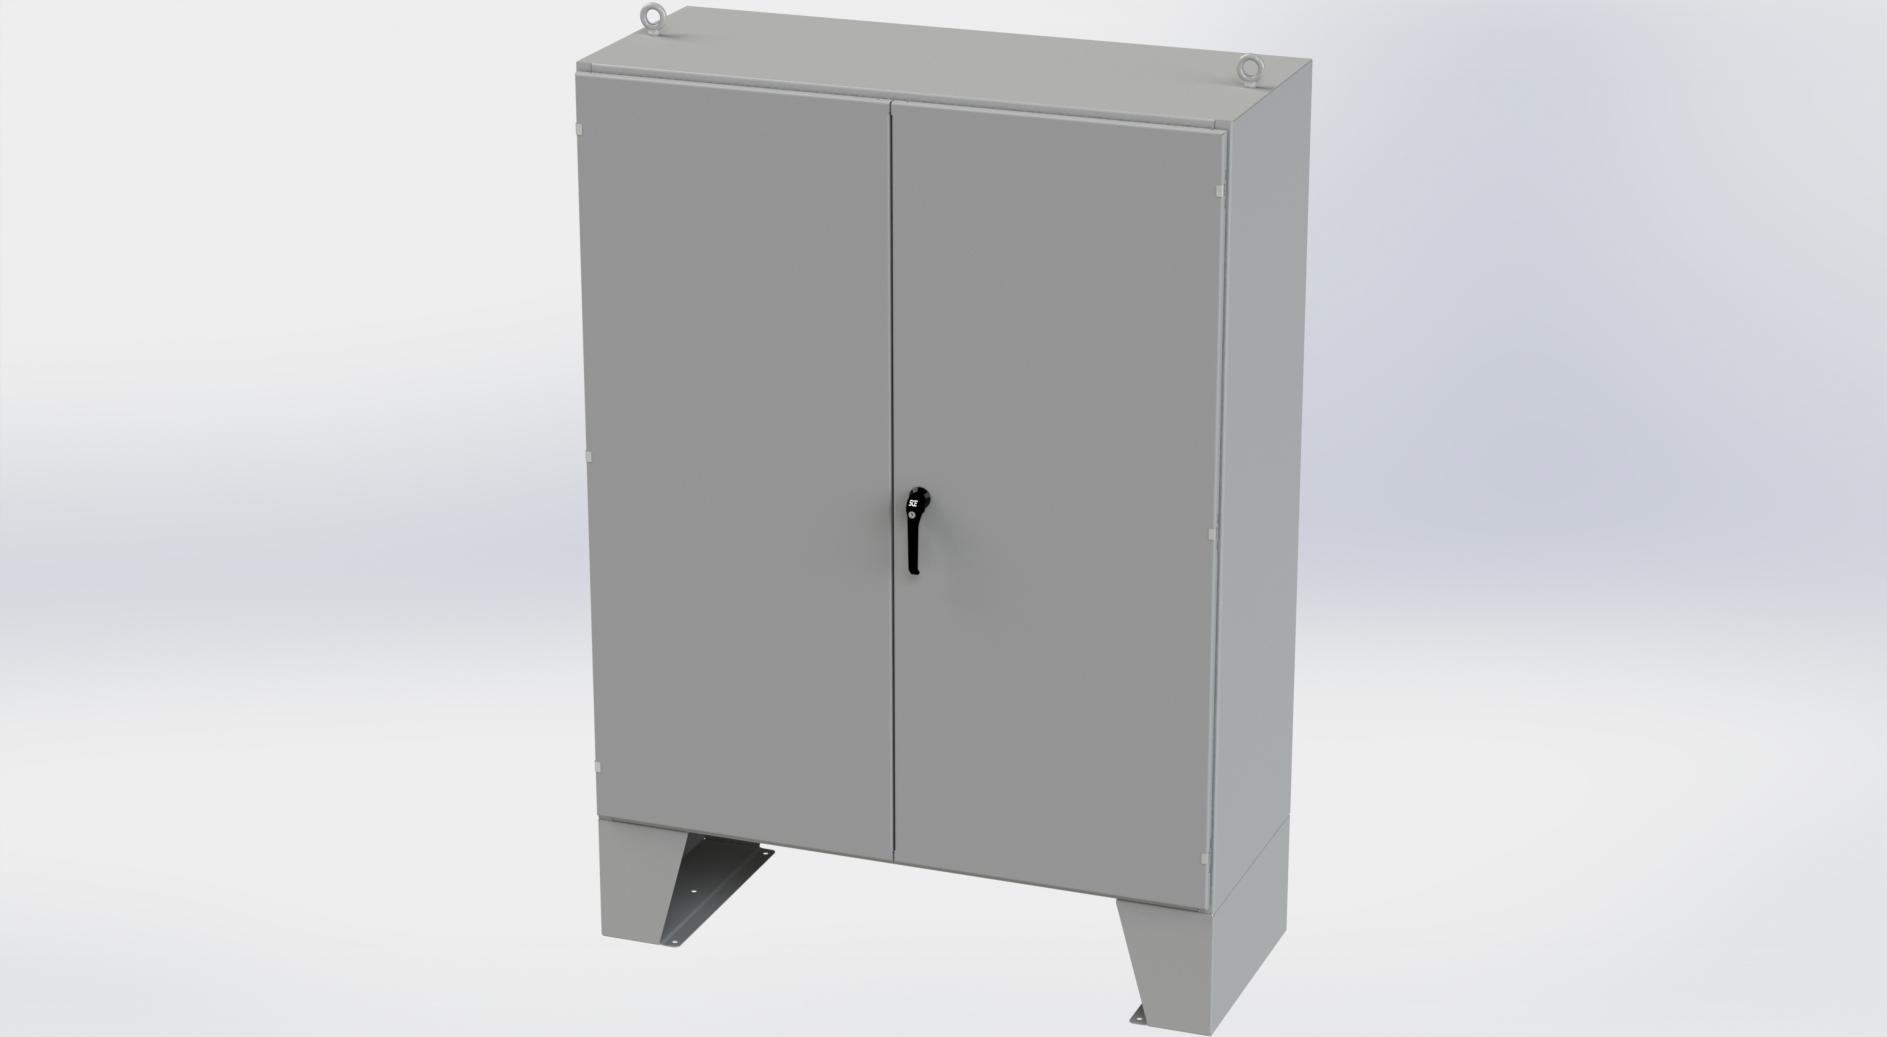 Saginaw Control SCE-726024ULP 2DR LP Enclosure, Height:72.00", Width:60.00", Depth:24.00", ANSI-61 gray powder coating inside and out. Optional sub-panels are powder coated white.